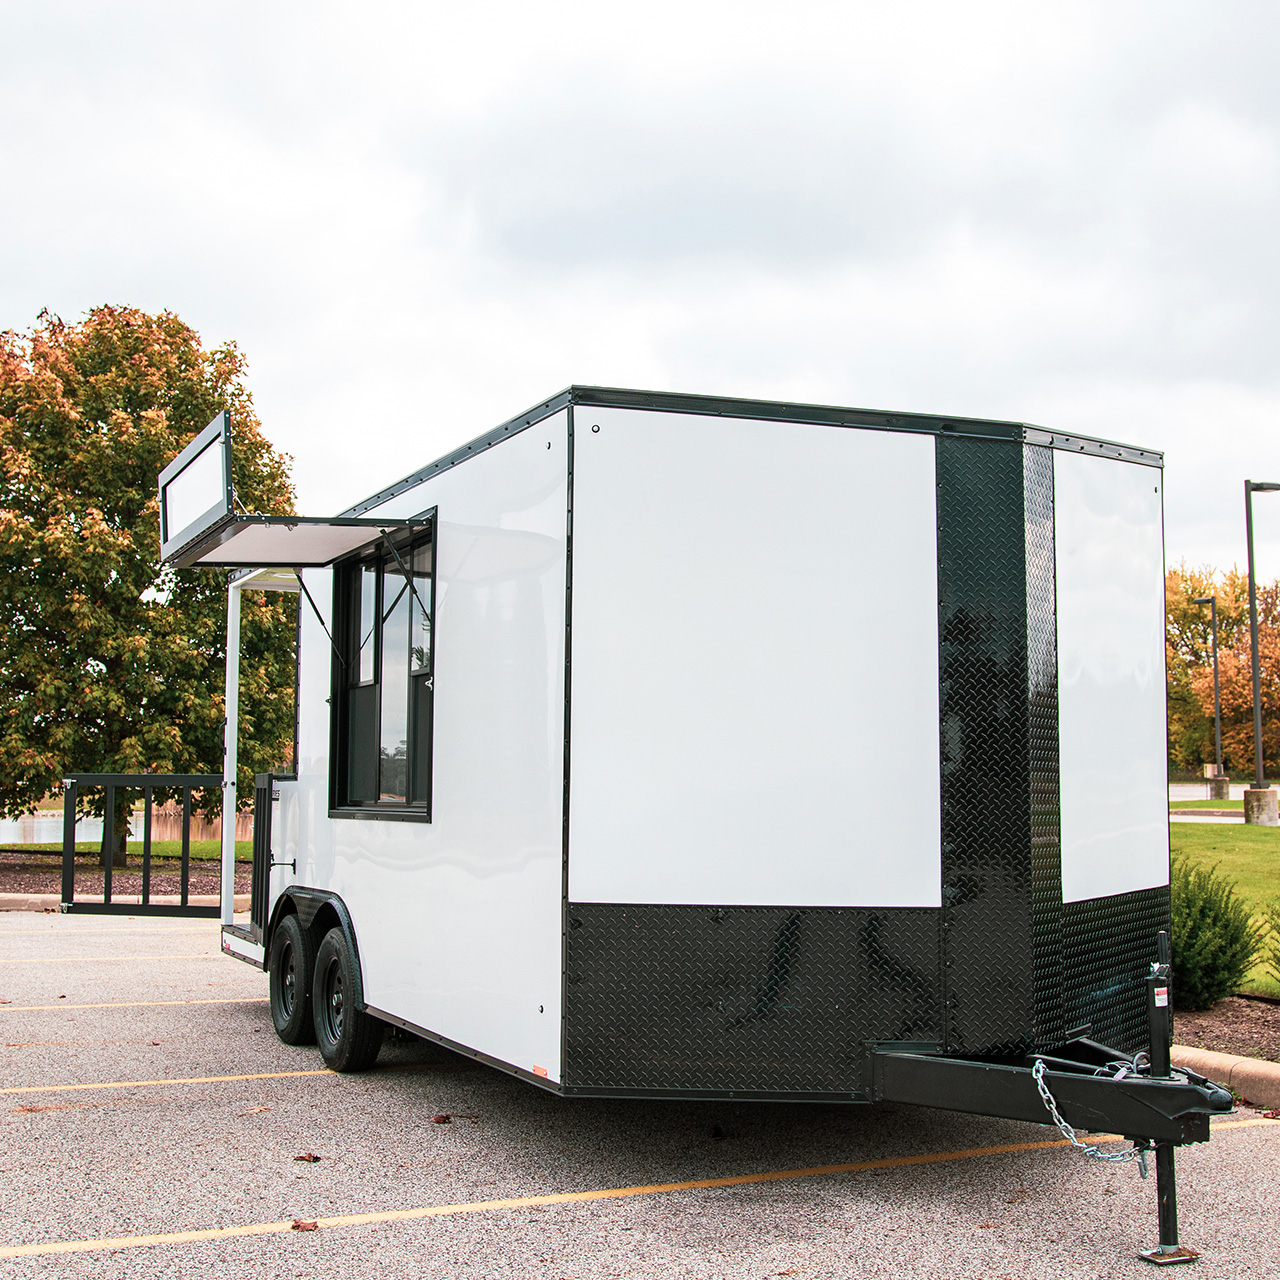 The Concession Package is specifically designed for concessionaires, these trailers serve as the perfect destination for your vending business ventures.